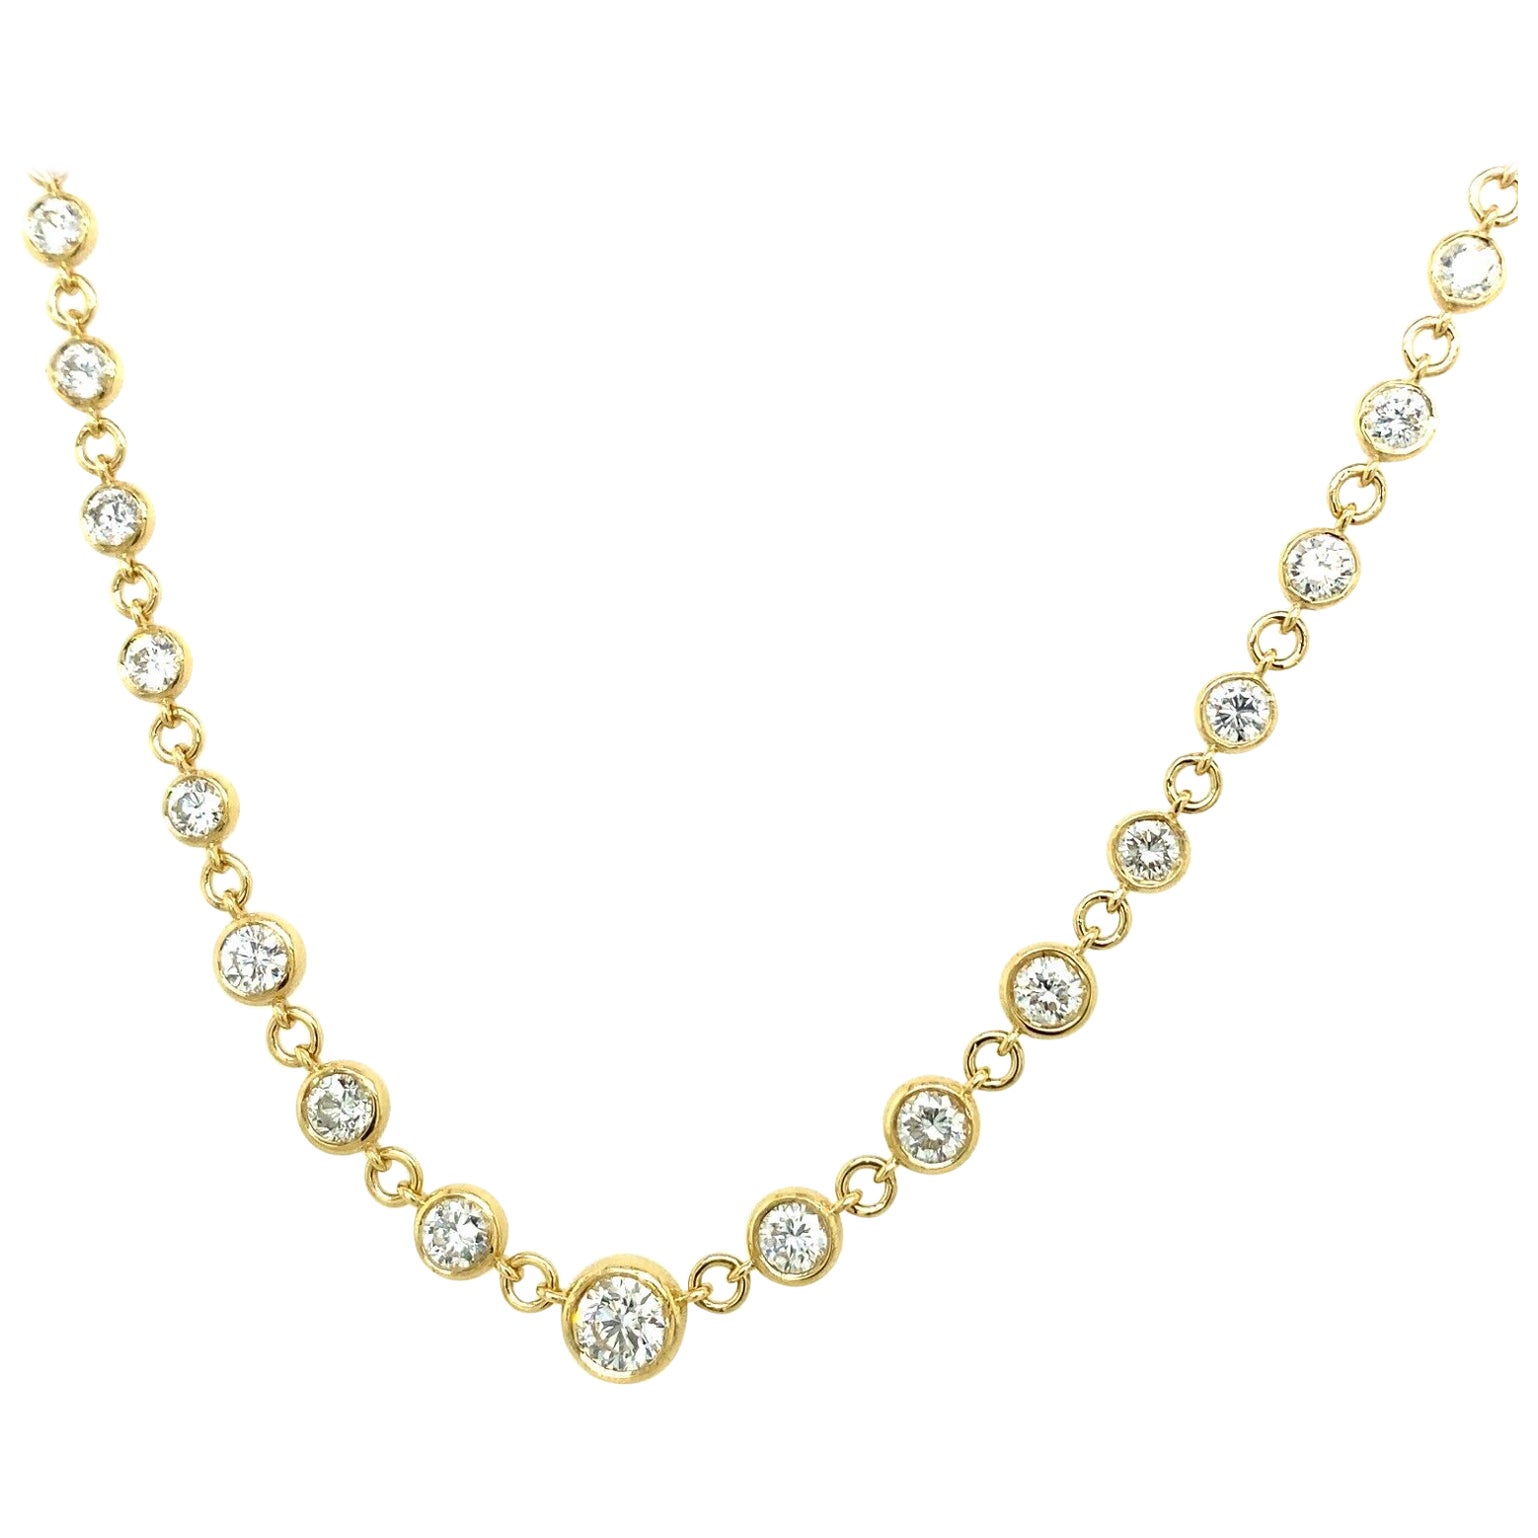 Necklace Set with 2.67ct Round Brilliant Cut Diamonds in 18ct Yellow Gold